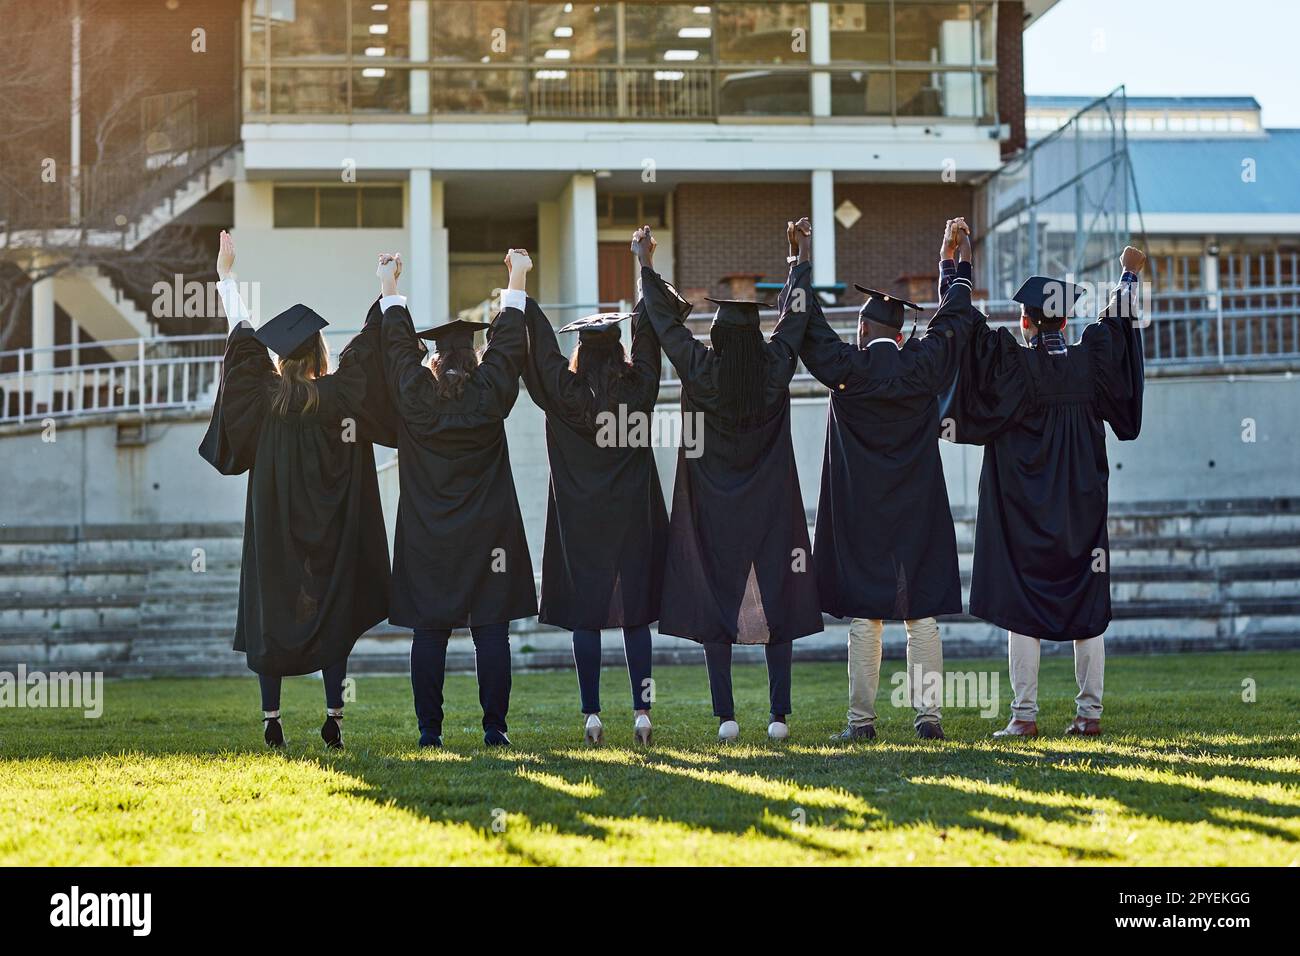 Dream big and achieve bigger. Rearview shot of a group of students standing in a line with their arms raised on graduation day. Stock Photo